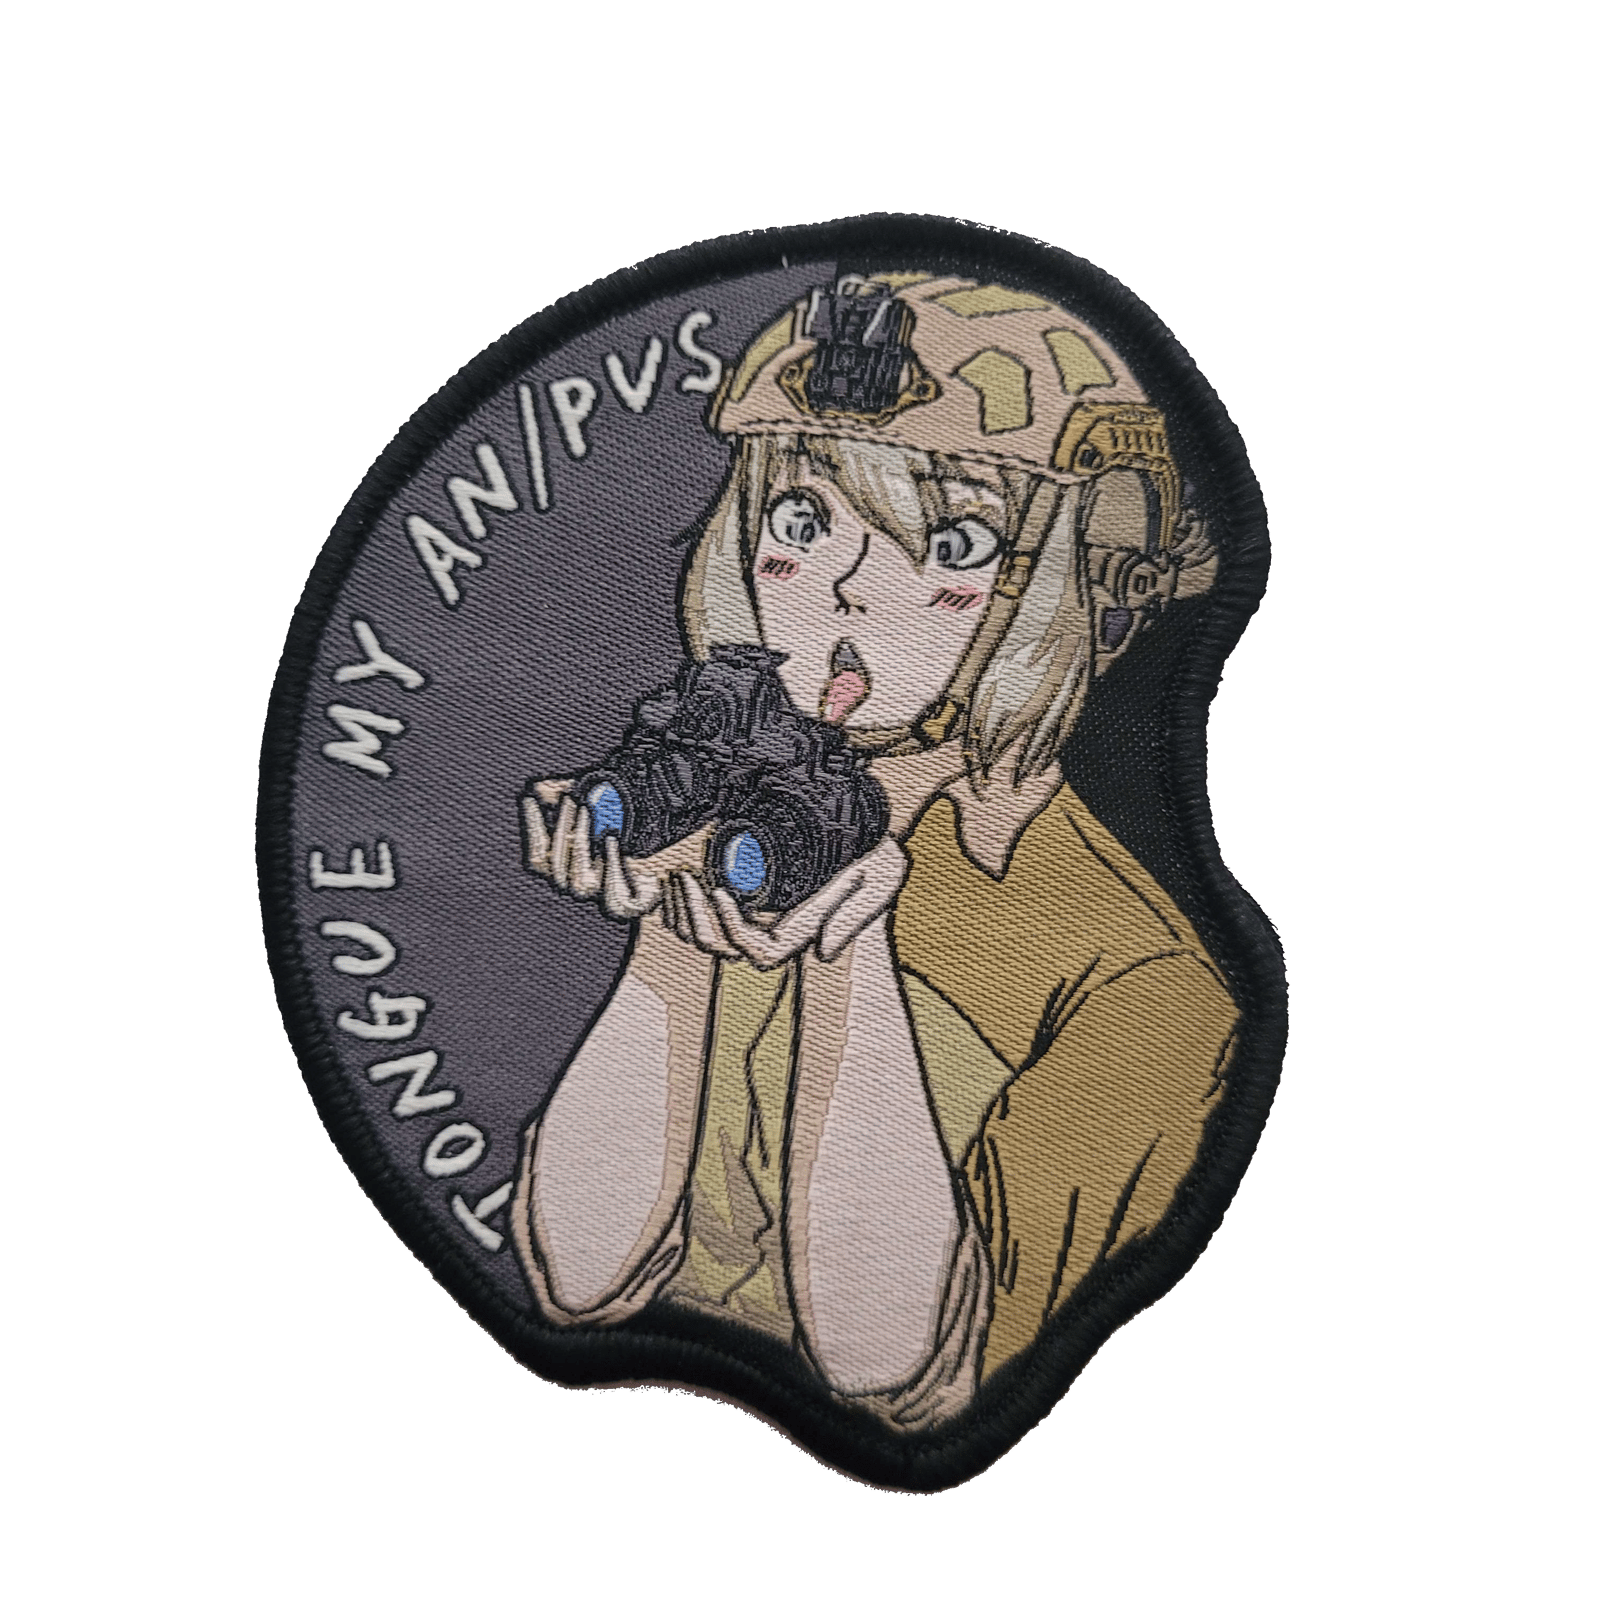 Had some beautiful anime patches made this year available on my !! : r/ Patches, Anime Patches - valleyresorts.co.uk